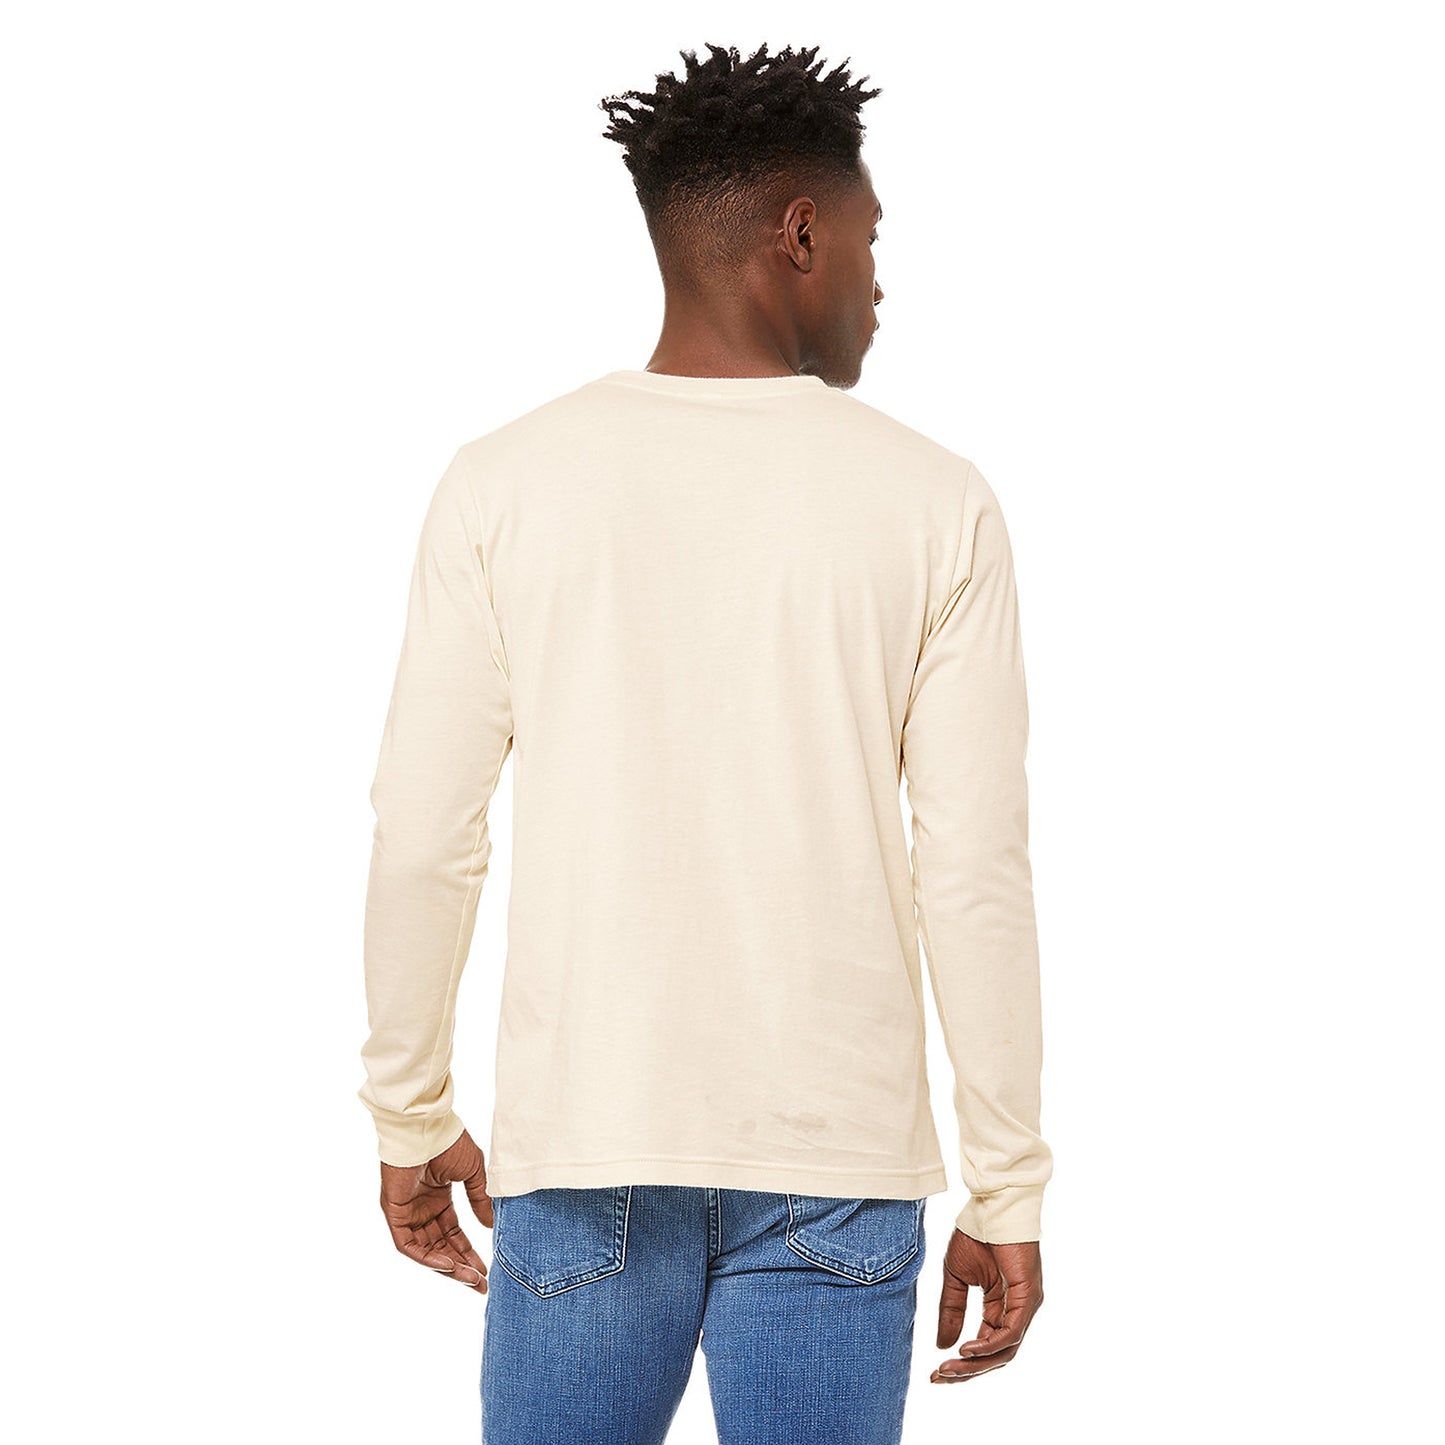 Back view of Montana in Streetwear Montana Natural Men's Long Sleeve Shirts from Park Attire